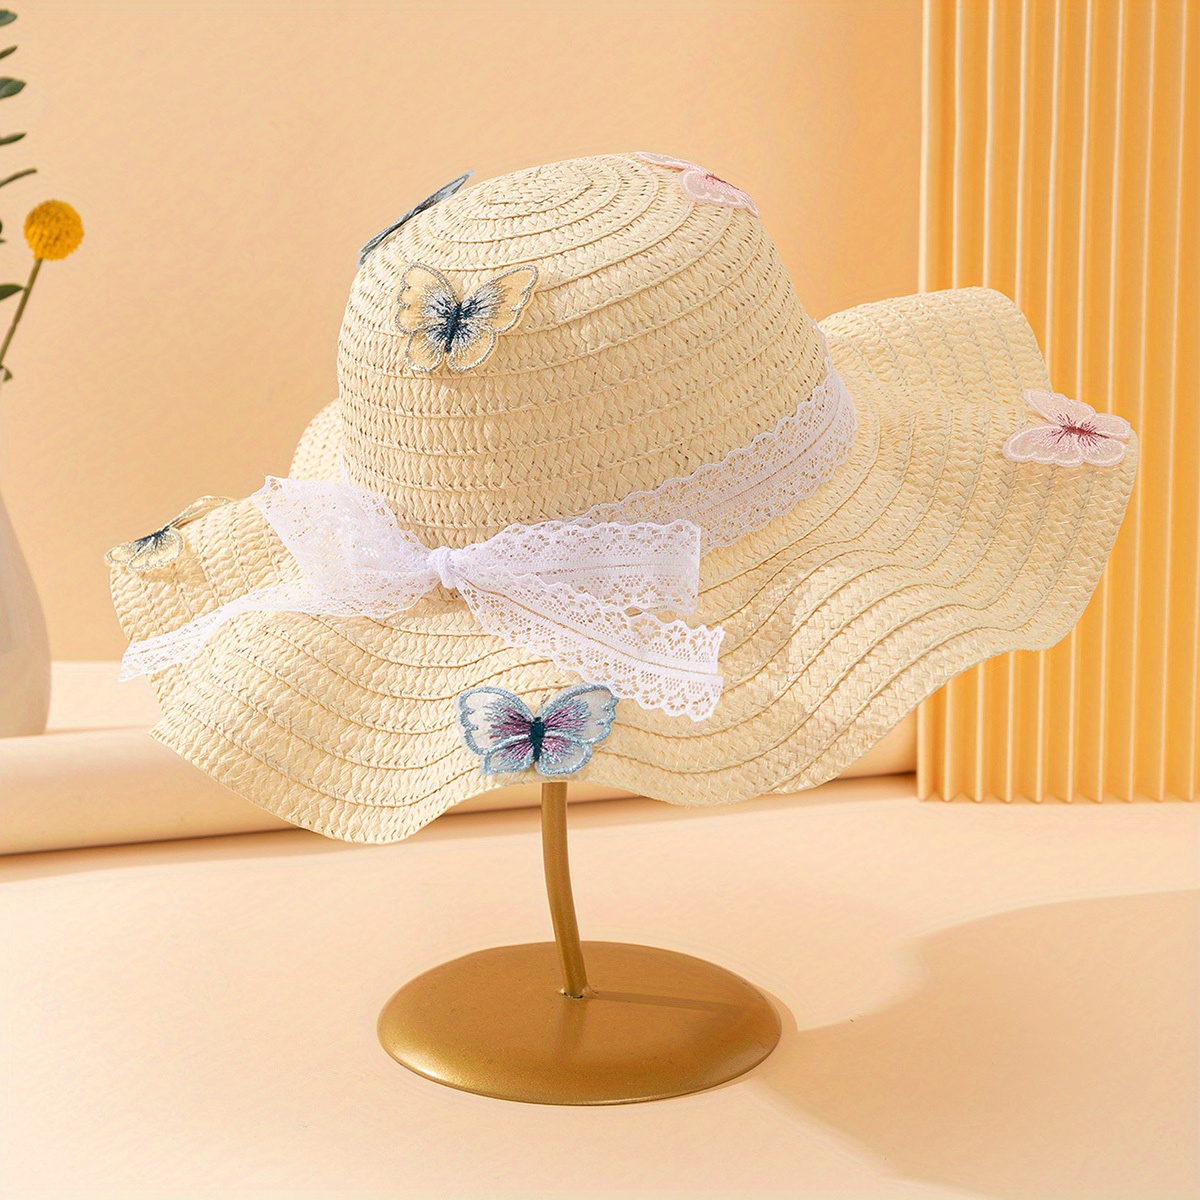 1pc Women Lace Streamer & Butterfly Decoration Sunscreen Sunshade Ruffle Straw Hat for Outdoor Beach Travel Vacation Sunscreen Hat ( Butterfly